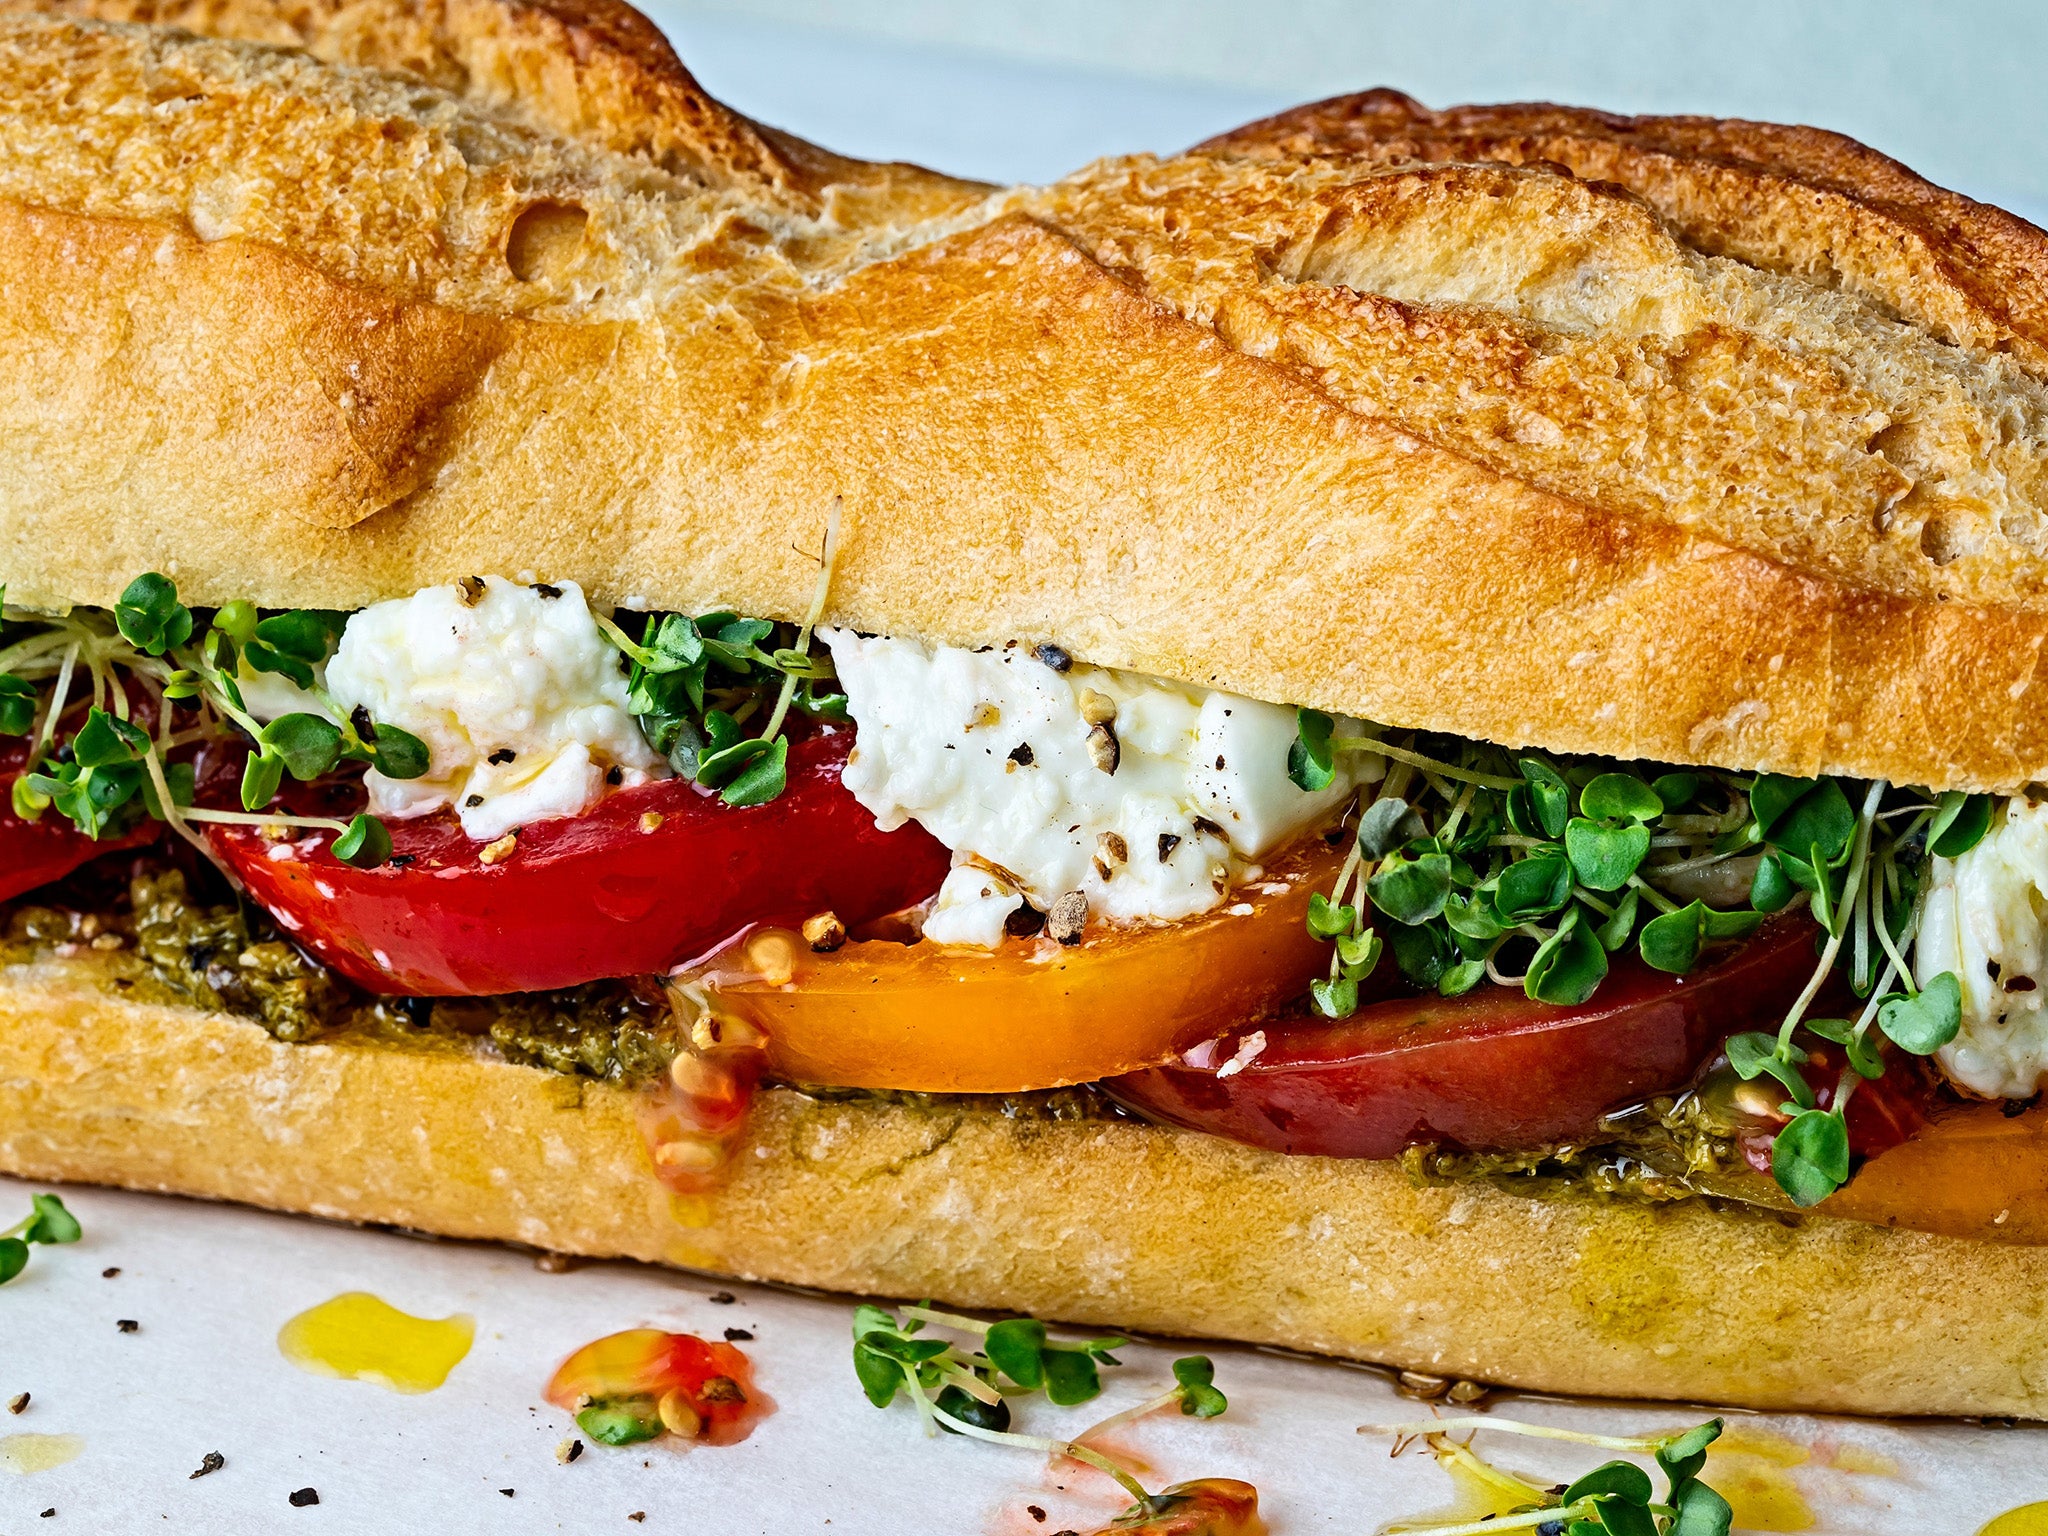 You can use approximately the same ingredients in the Caprese Salad to make 3 or 4 Caprese sandwiches